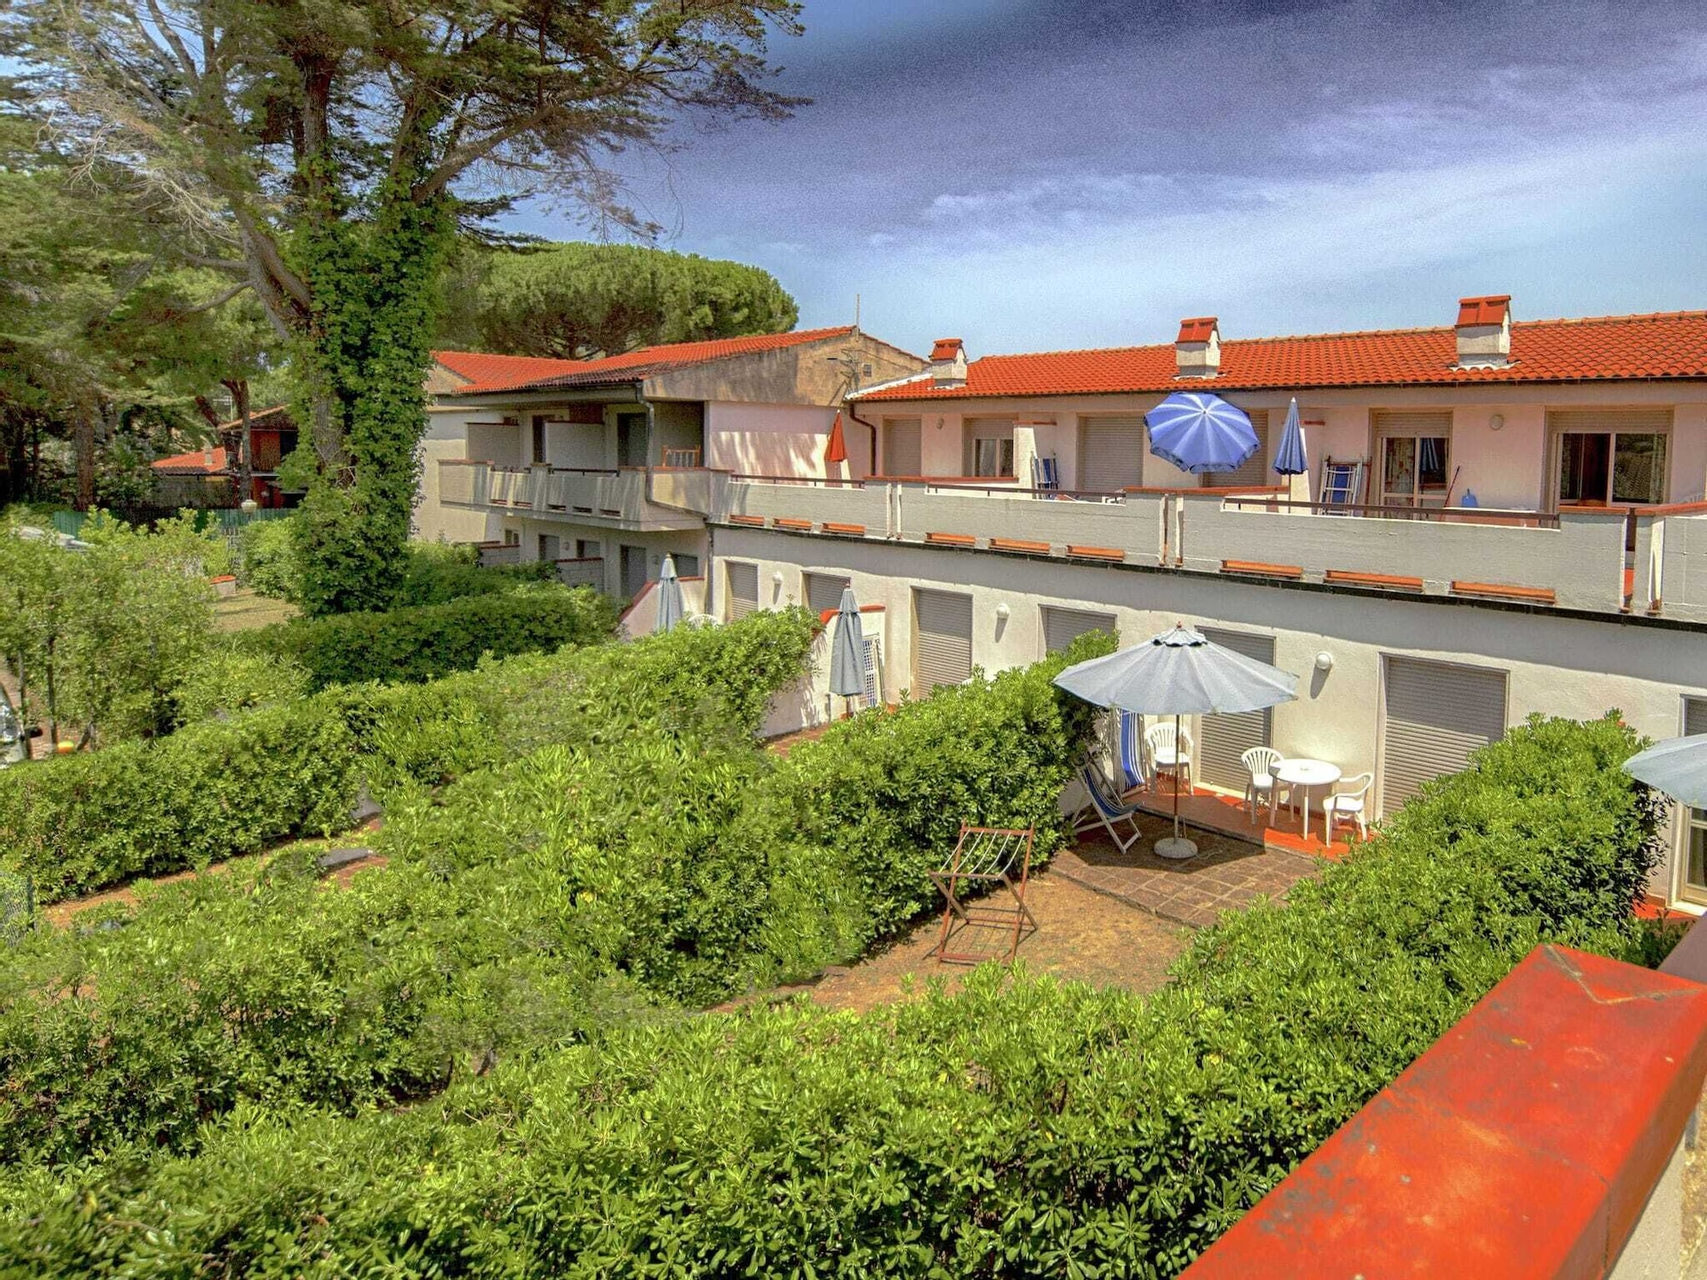 Exterior & Views 1, Lovely Holiday Home in Giannella near Beach, Grosseto